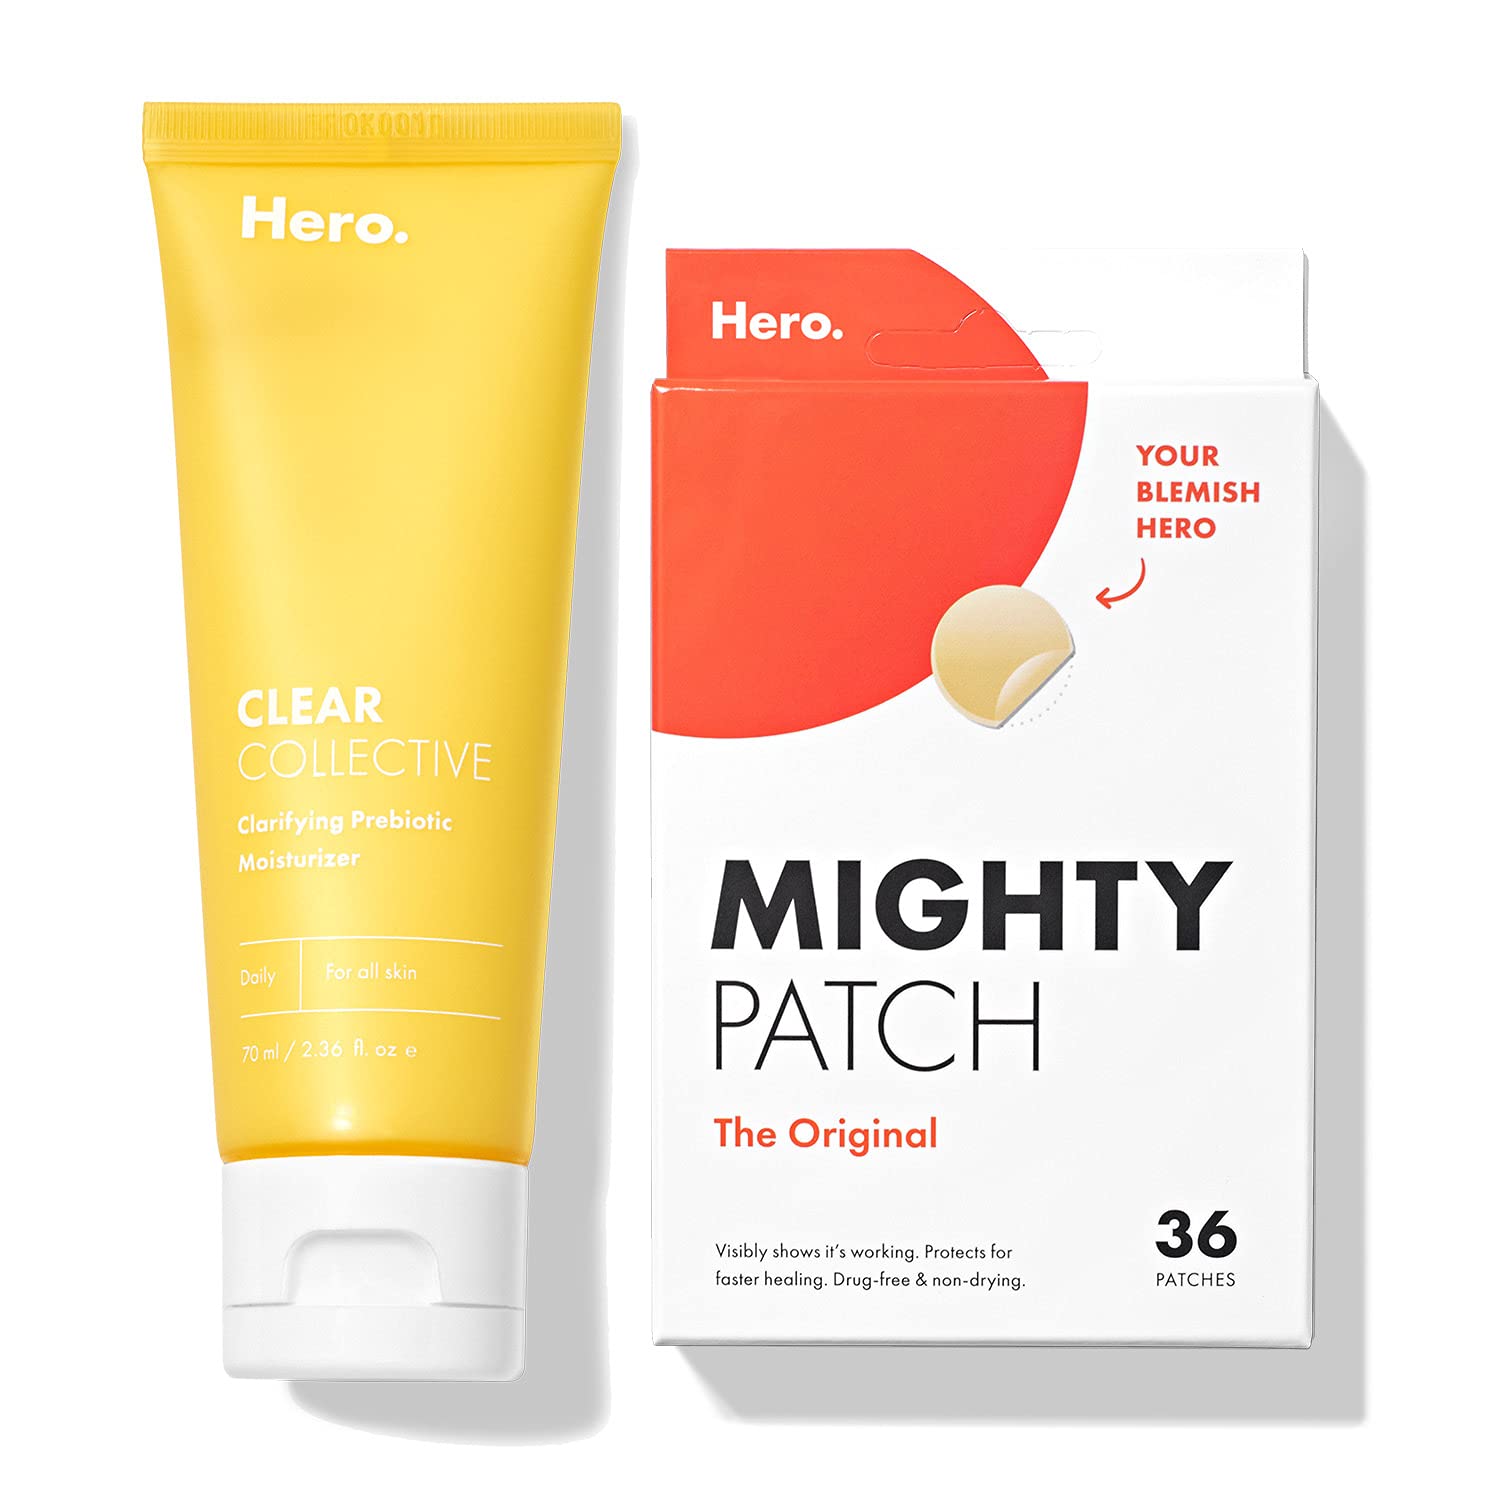 Mighty Patch Hero Original (36 count) and Clarifying Prebiotic Moisturizer Bundle